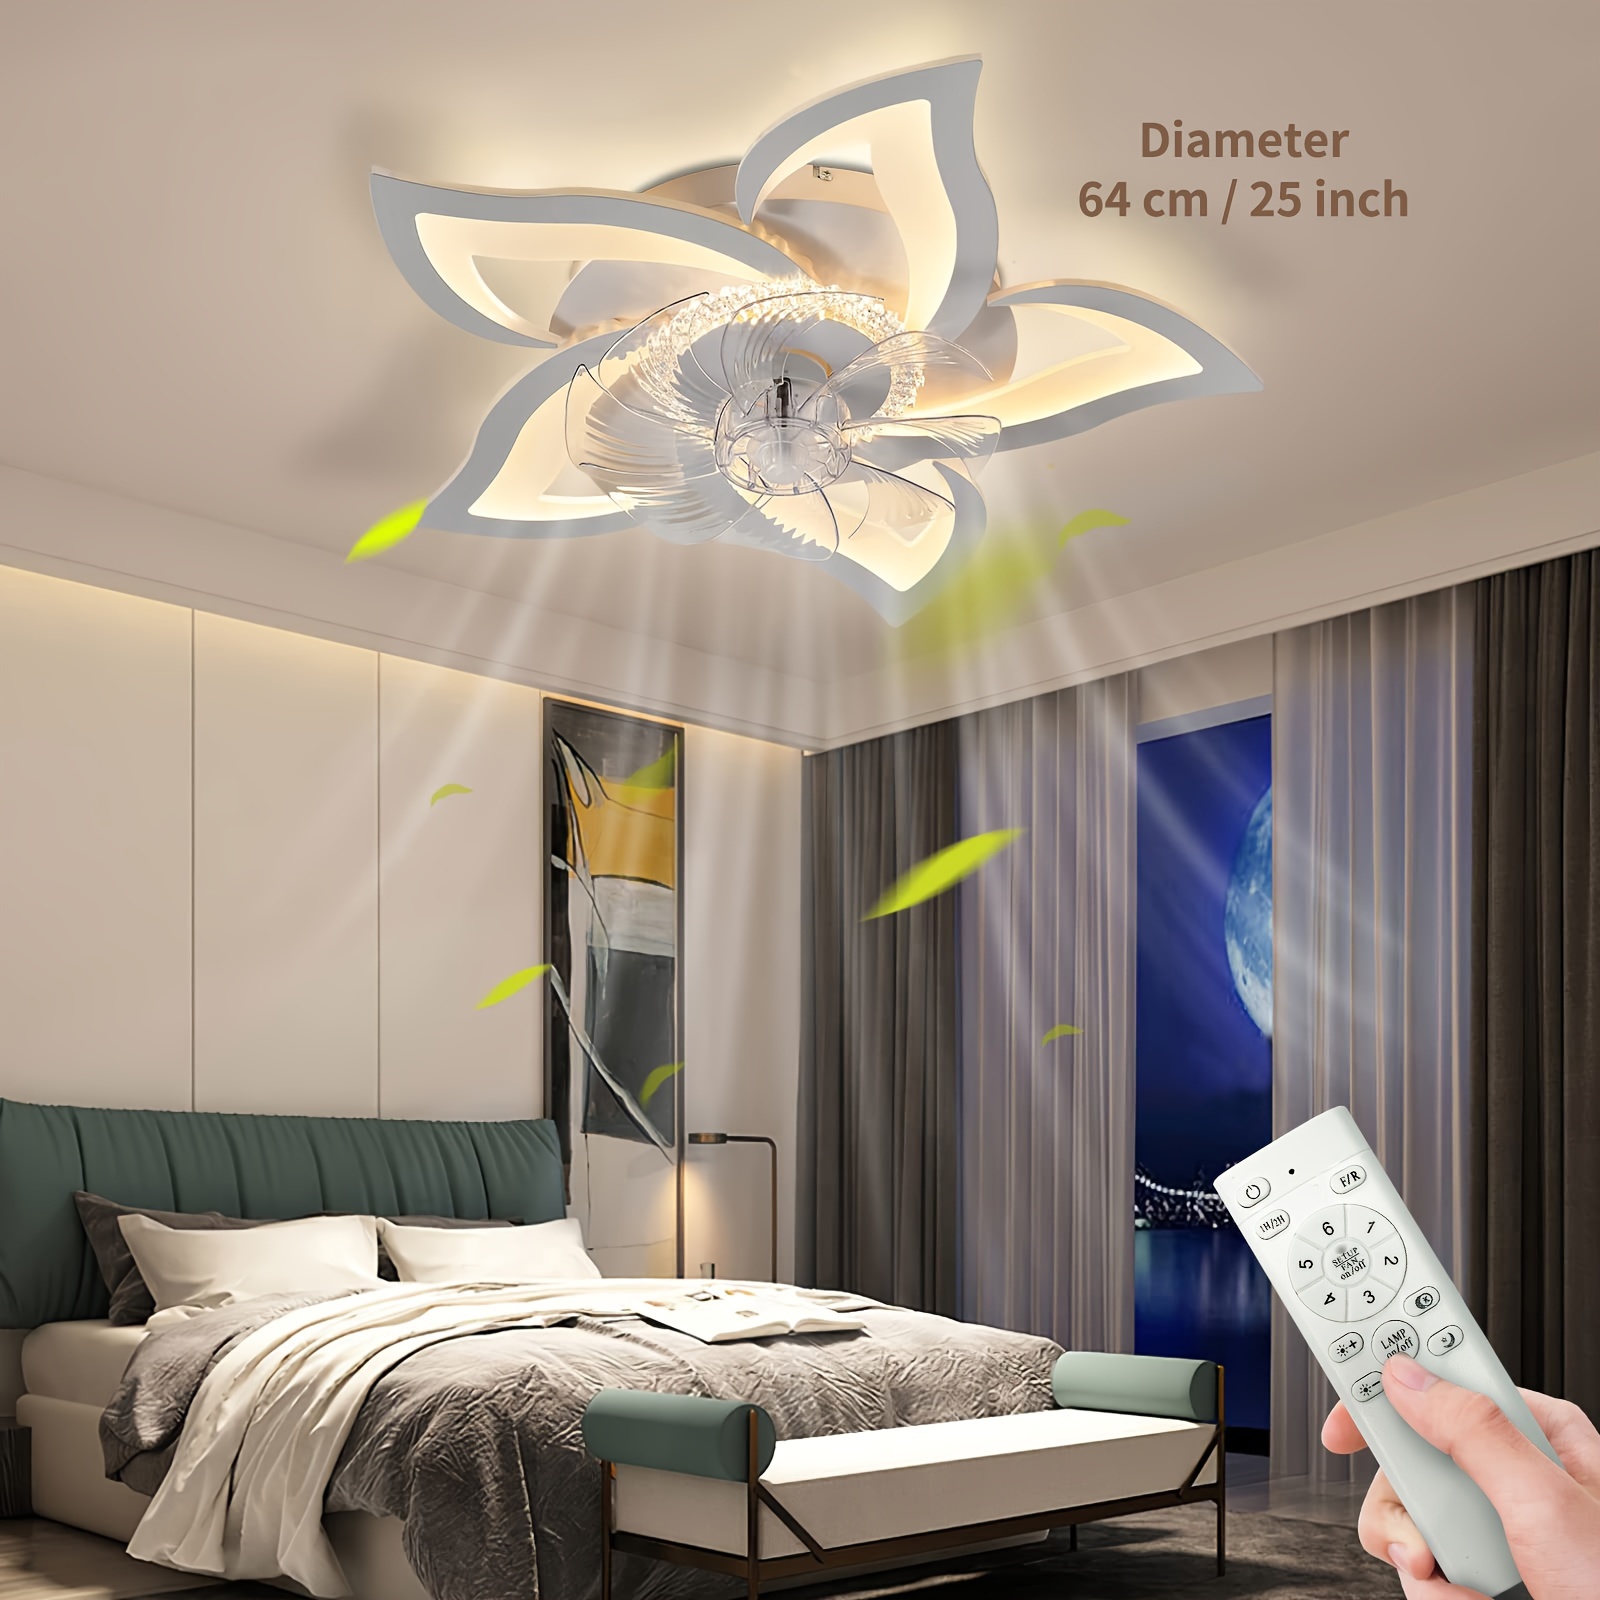 

Ceiling Fan With Light - Modern Ceiling Fan With Smart Led Light And Remote Control, 6 Speeds, 3 Colors, Dimmable For Living Room, Bedroom, And Kitchen, Ah-dx-fan